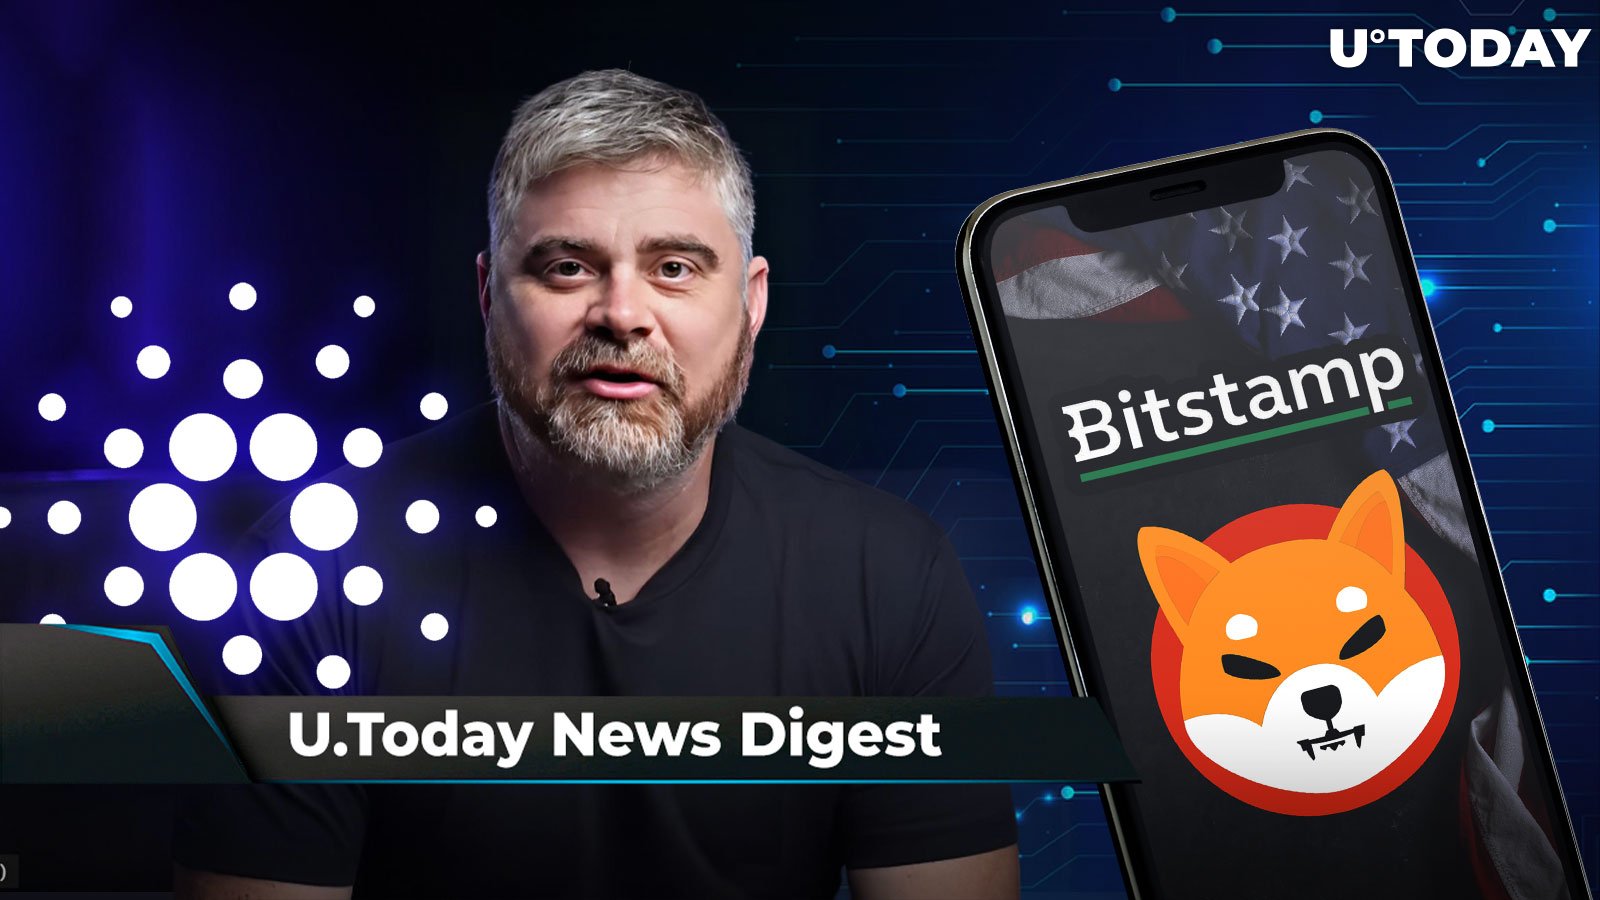 XRP Forms First “Golden Cross” in Months, BitBoy Says ADA Listing on FTX May Threaten Cardano, Bitstamp Brings SHIB to U.S.: Crypto News Digest by U.Today